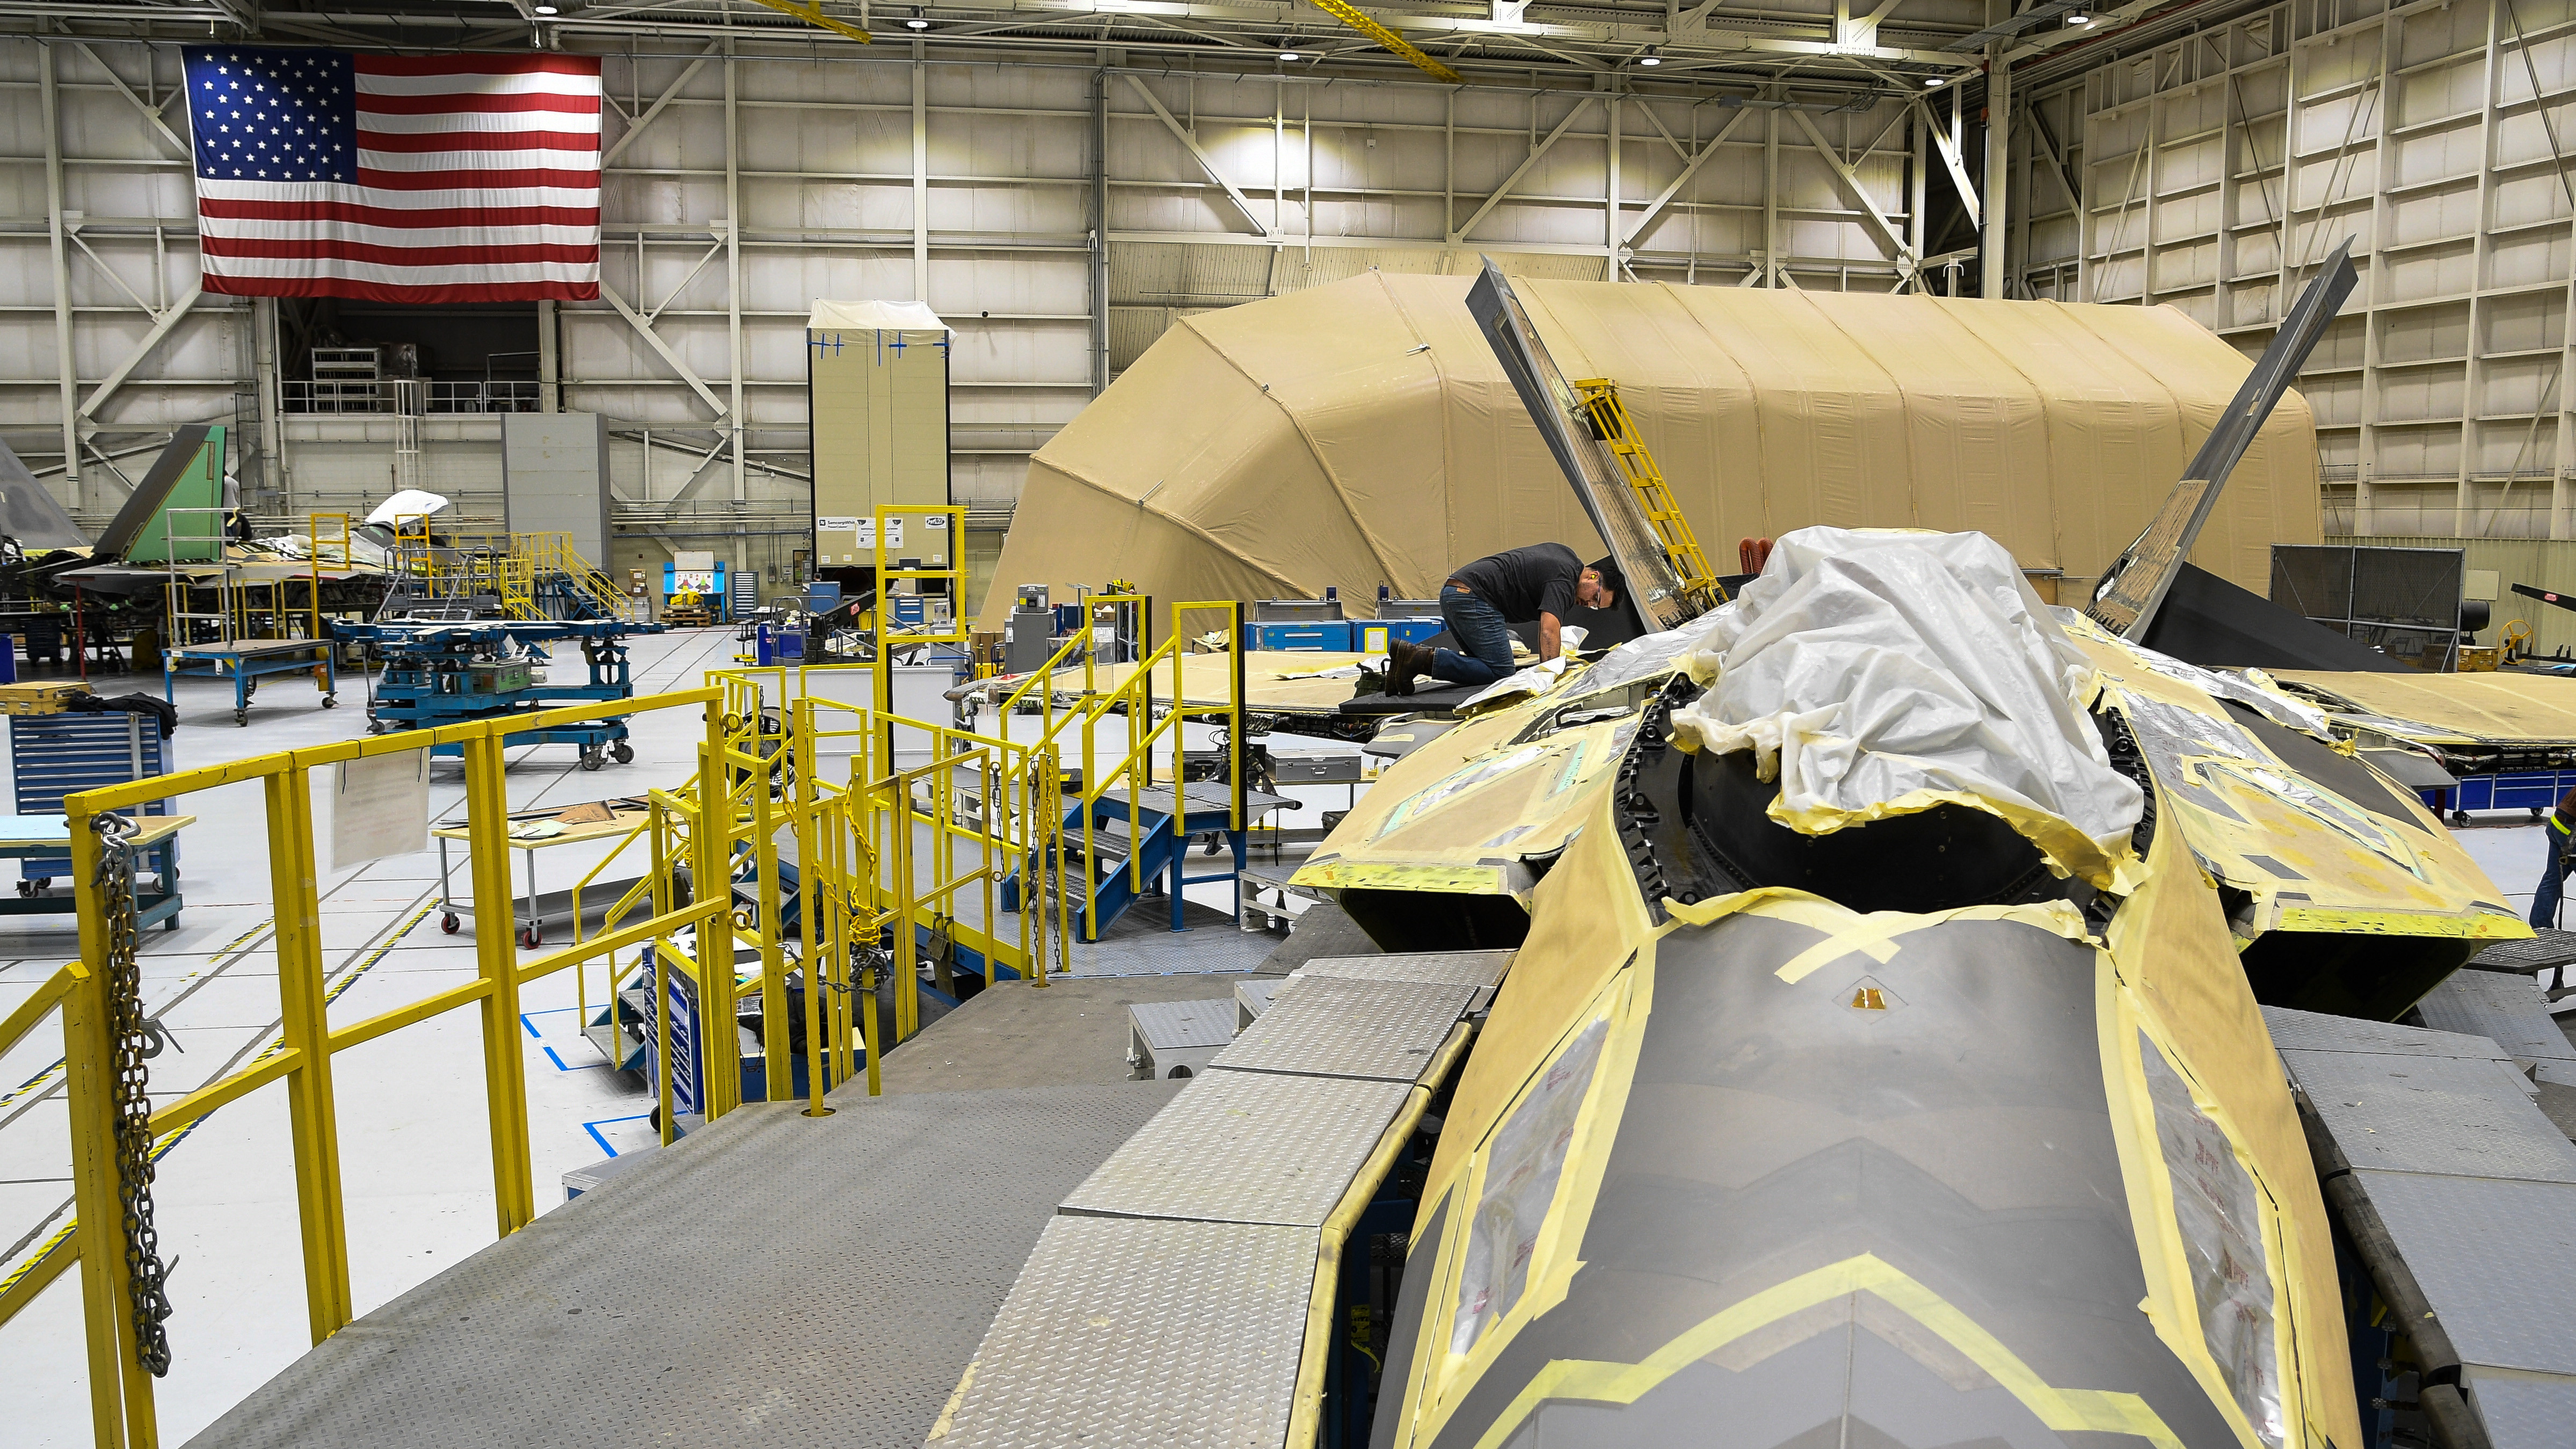 A 574th Aircraft Maintenance Sqaudron maintainer performs depot maintenance on F-22 fighter jet at Hill Air Force Base, Utah, Jan. 16, 2018. The 574th installed the first metallic 3D printed part on an operational F-22 in December. (U.S. Air Force photo by R. Nial Bradshaw)